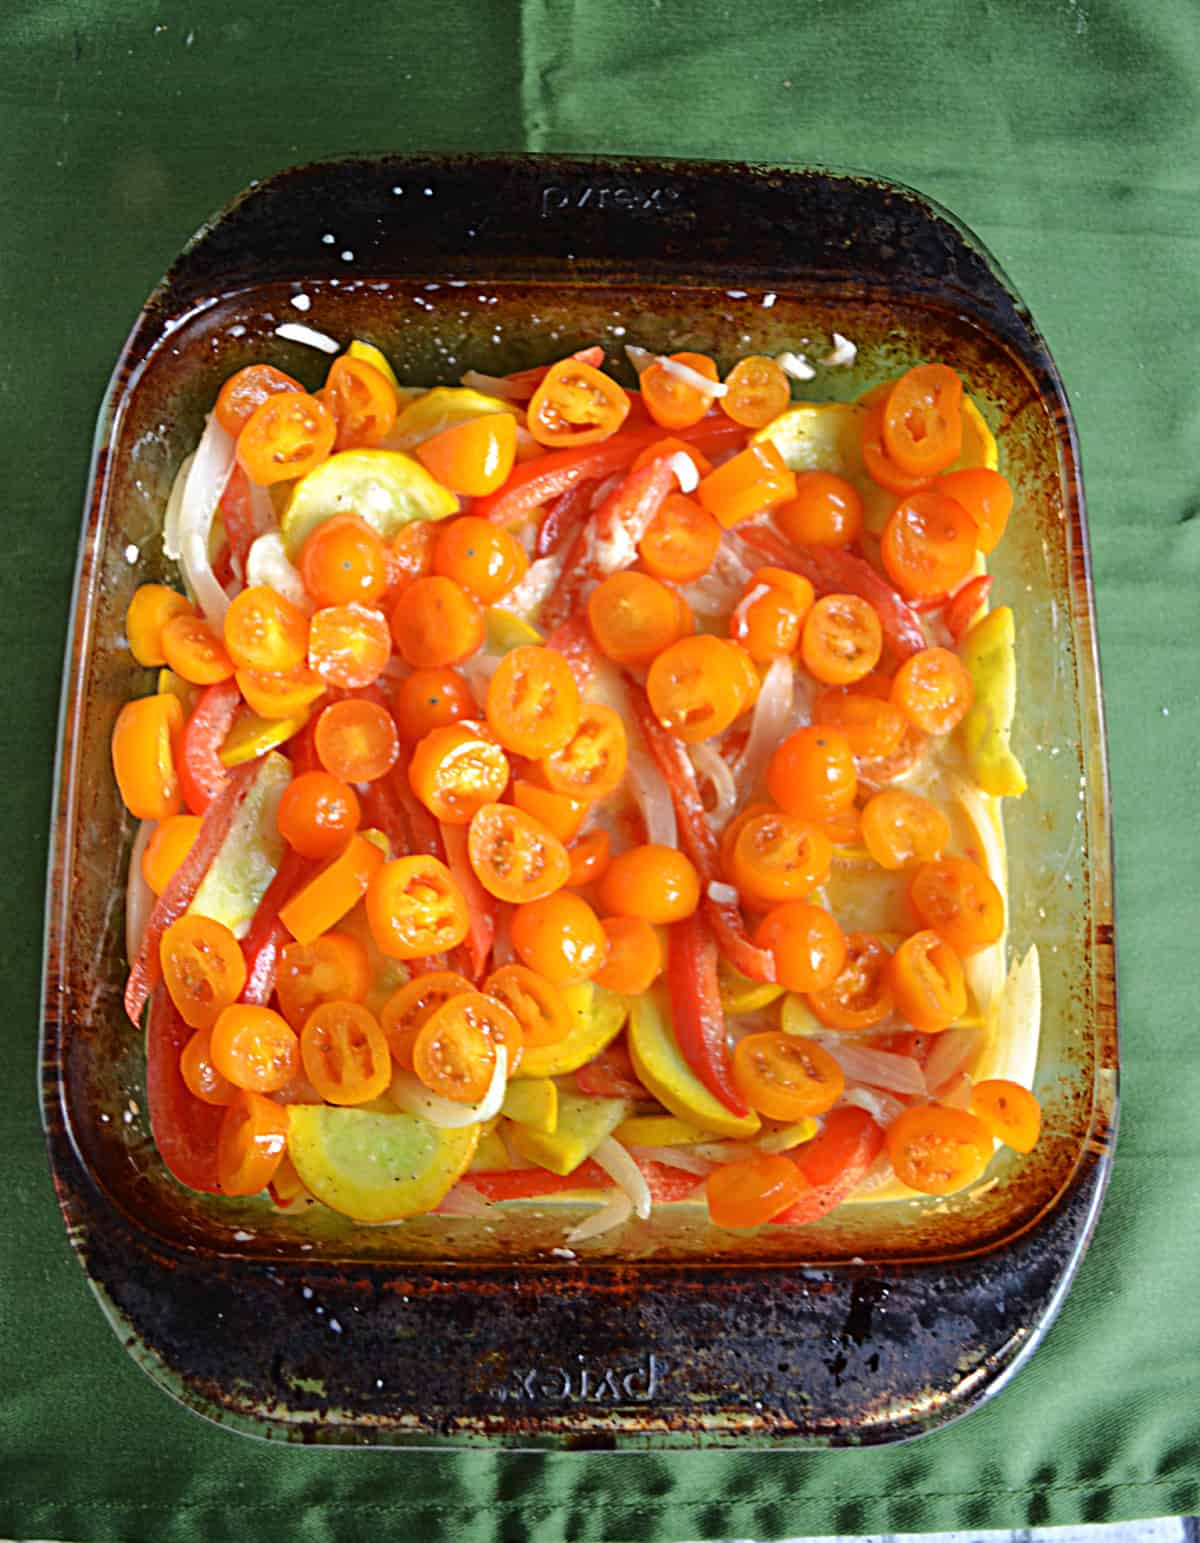 A baking dish full of vegetables including tomatoes and squash.